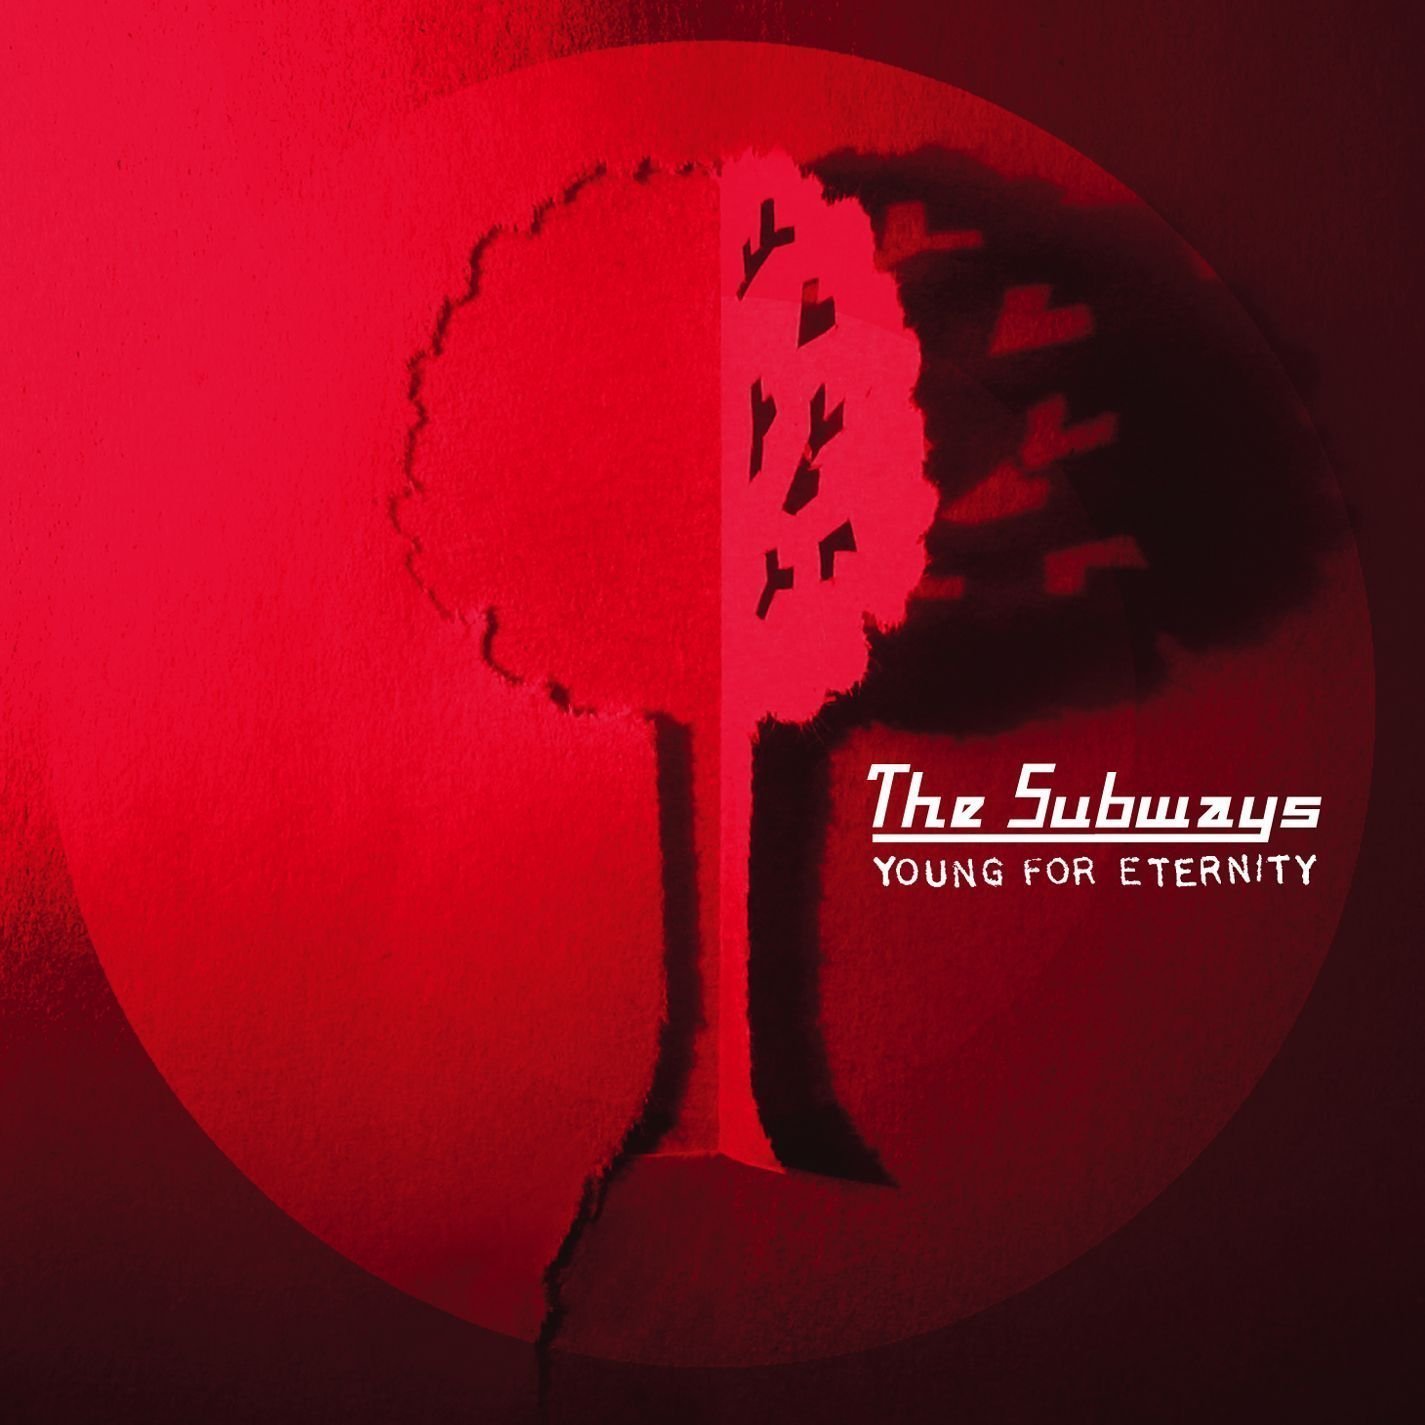 Vinyl Record The Subways - Young For Eternity (LP)